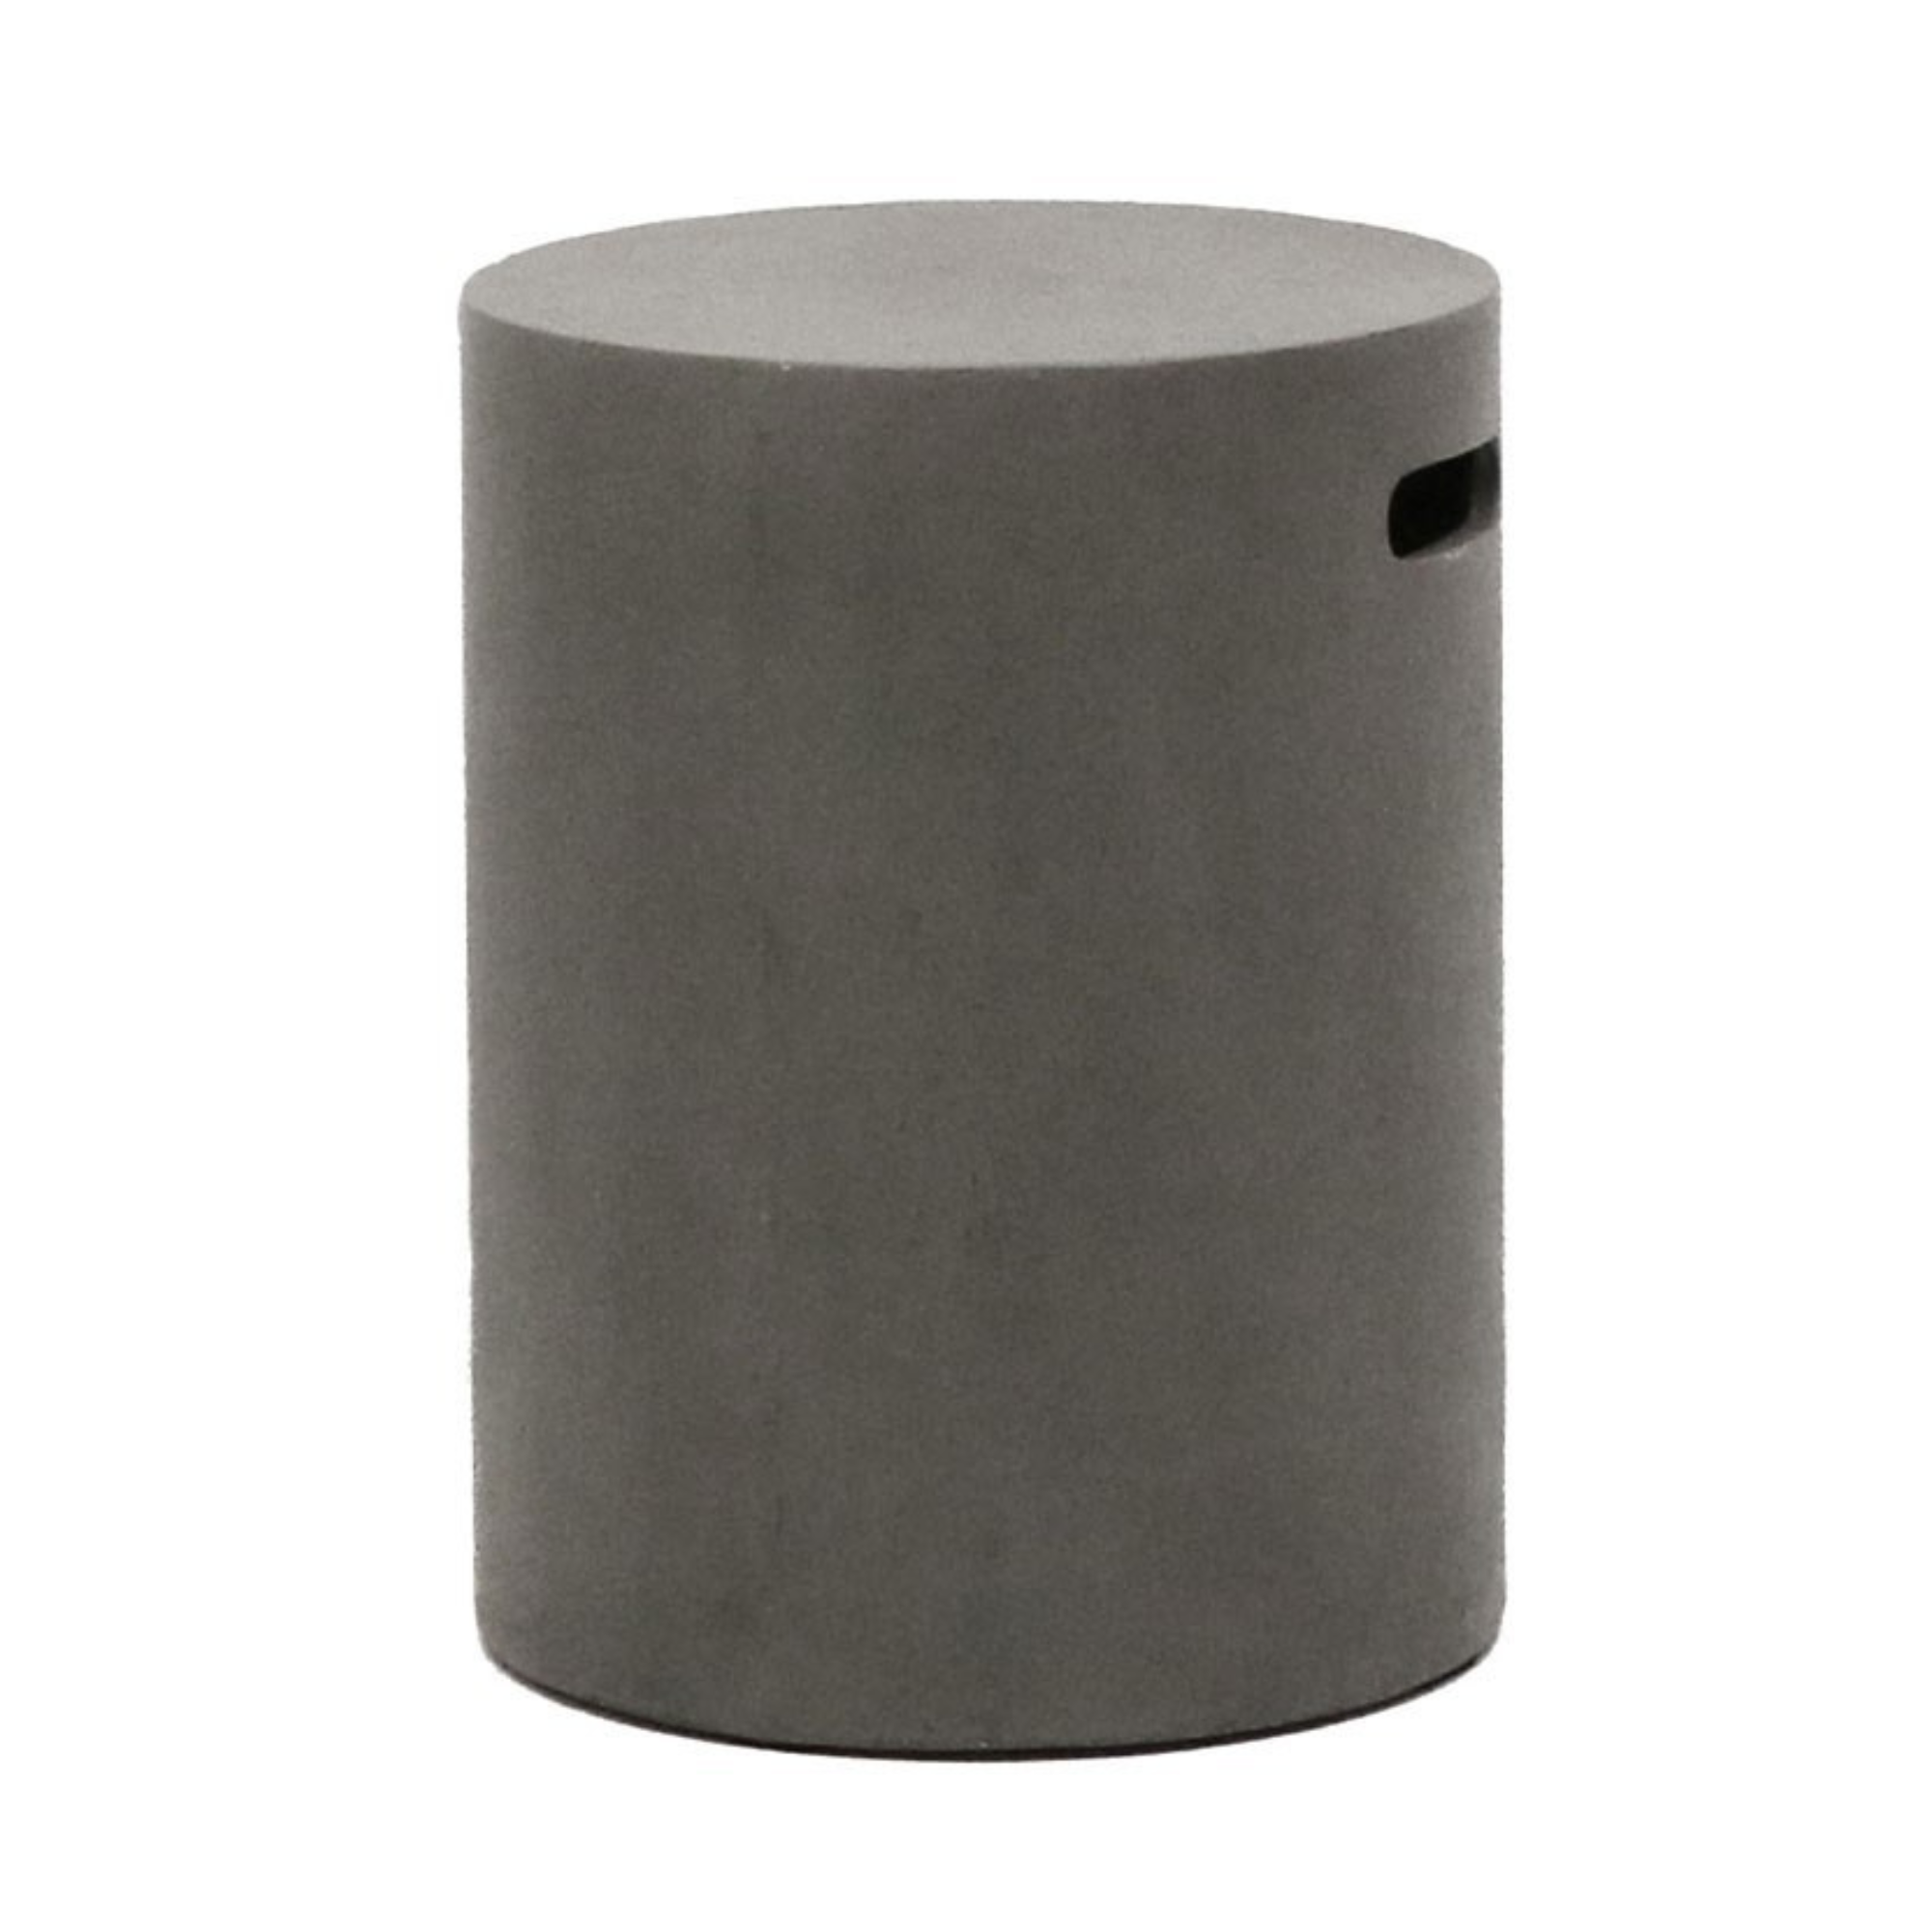 CONCRETE PIPE SIDE TABLE or STOOL